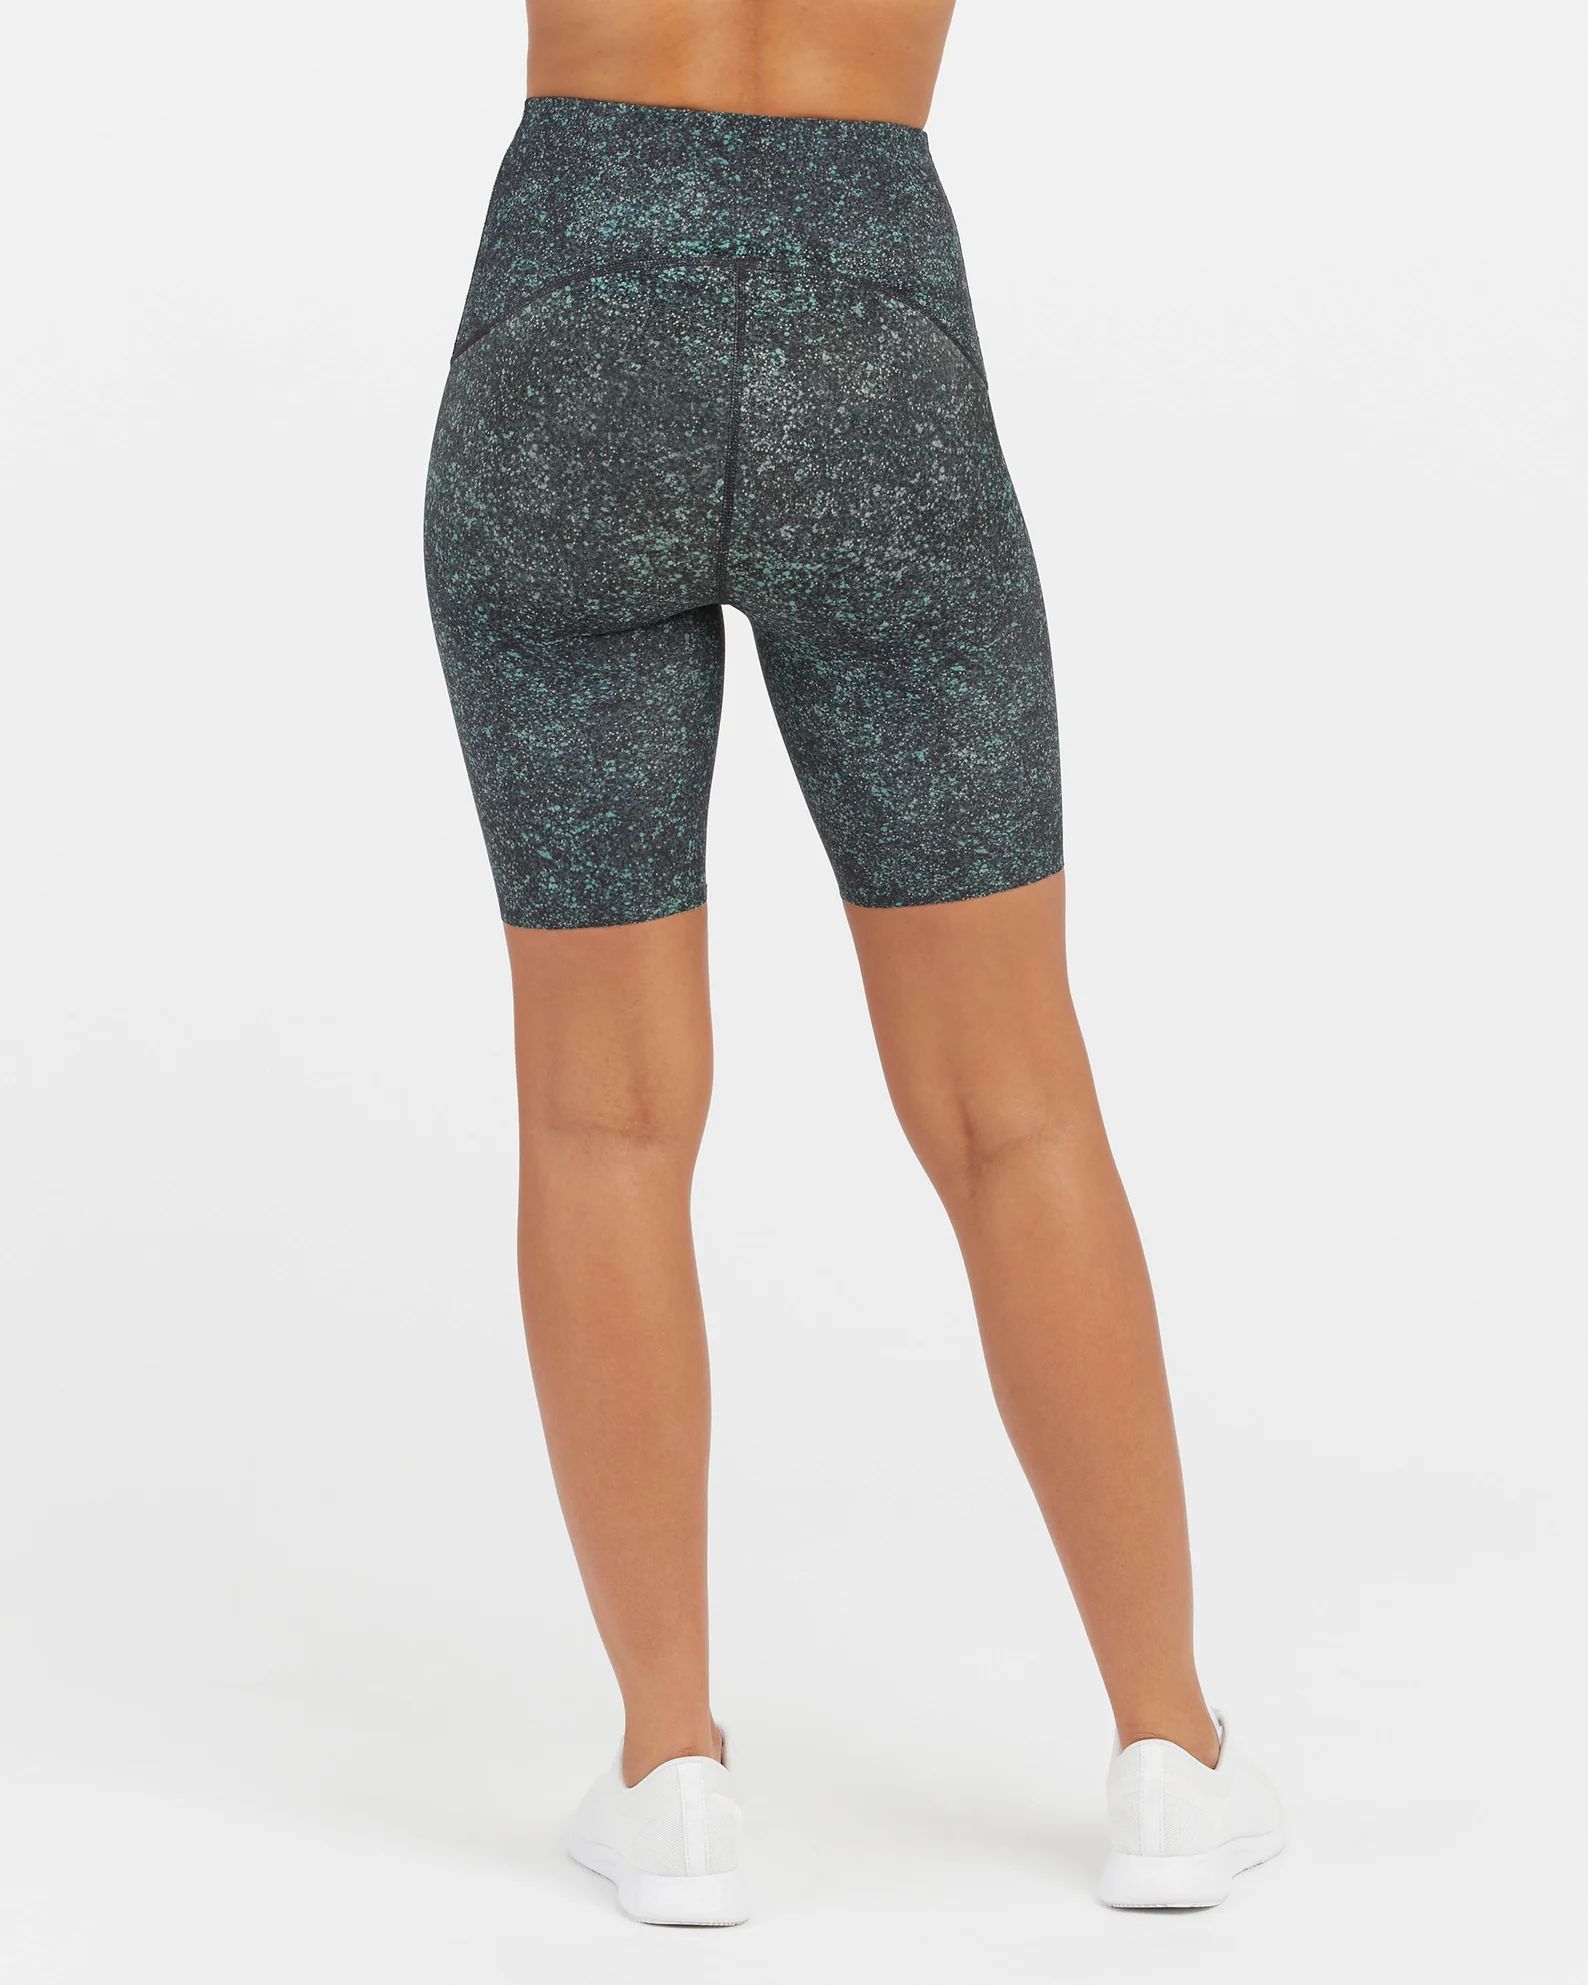 Booty Boost® Active 8” Speckled Bike Short | Spanx